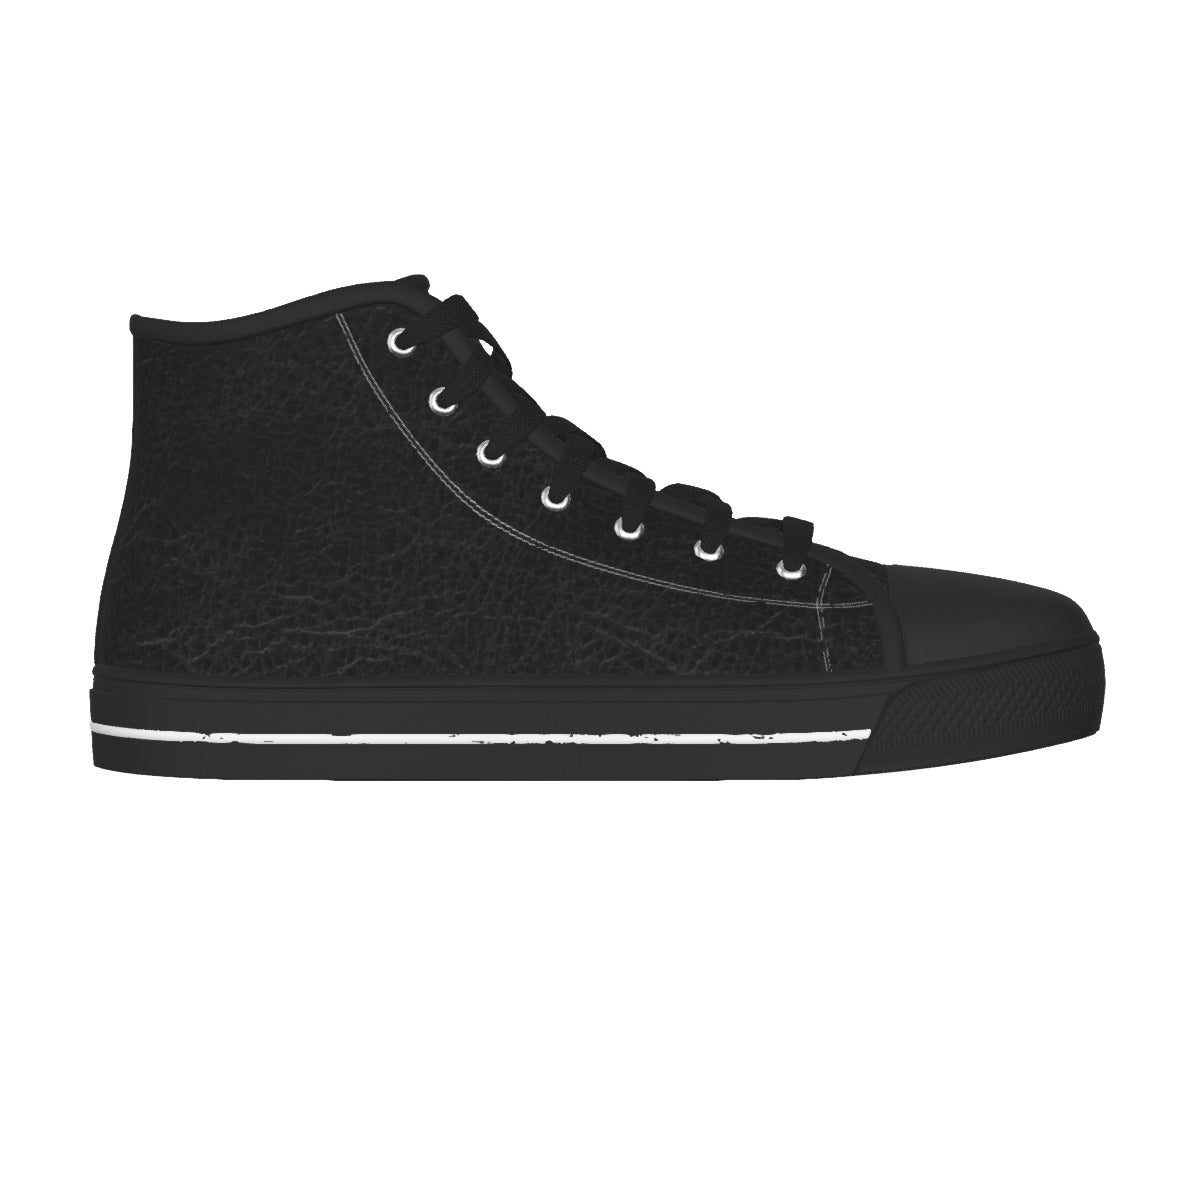 LEATHERTONE [Black](x)SoCal Black Sole Canvas Shoes | CANAANWEAR | Shoes |